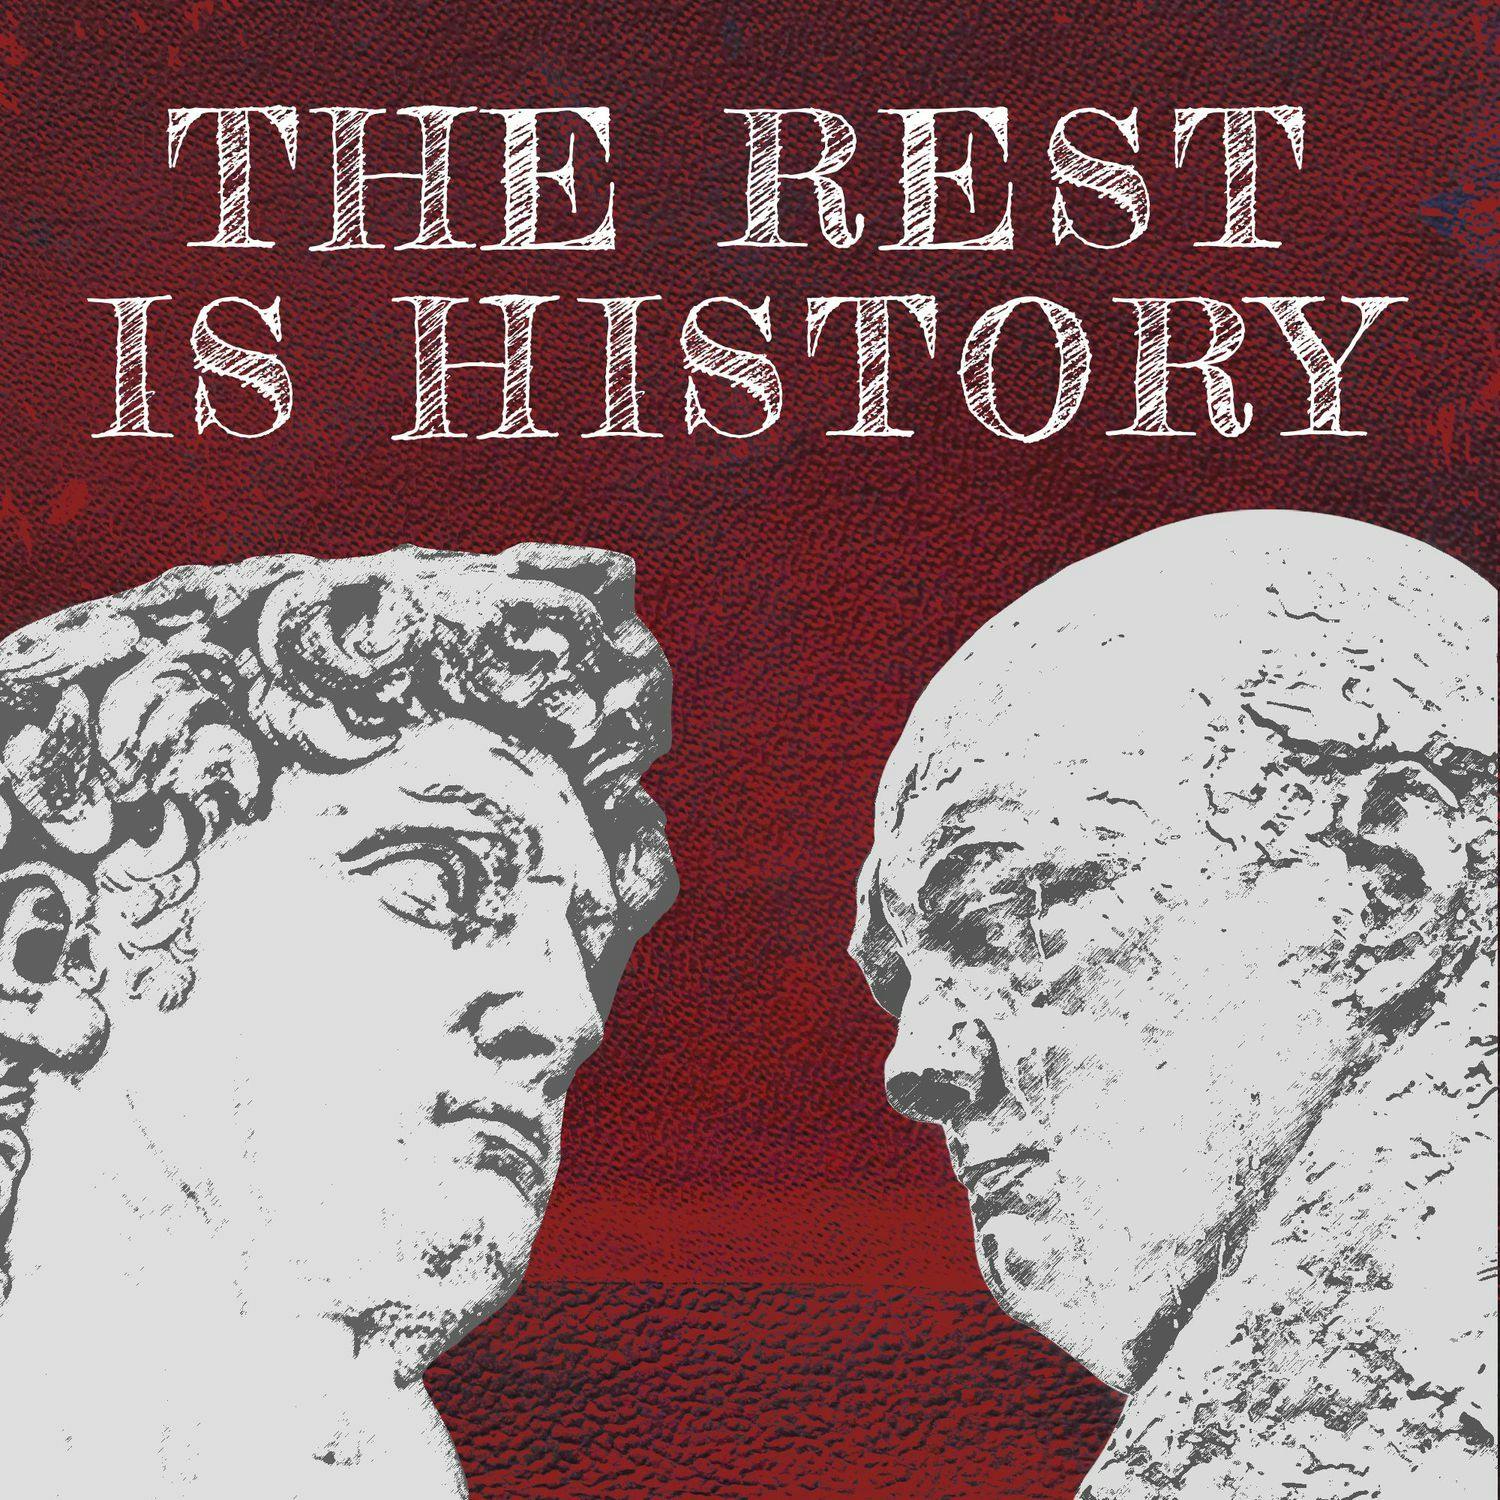 History's greatest clubs (preview) by Goalhanger Podcasts